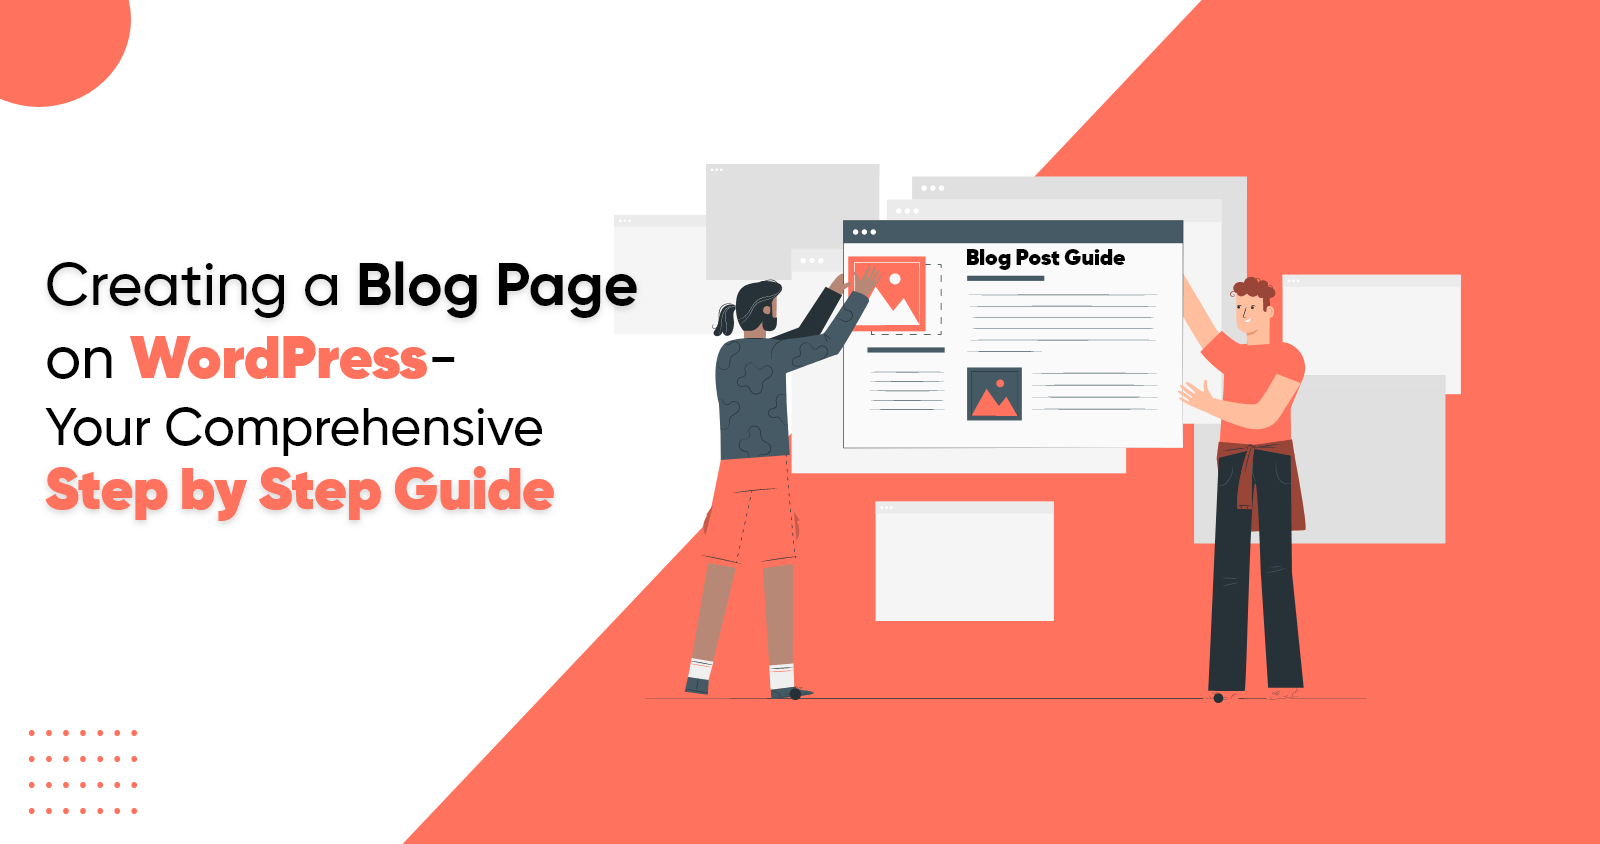 Creating a Blog Page on WordPress - Your Comprehensive Step by Step Guide